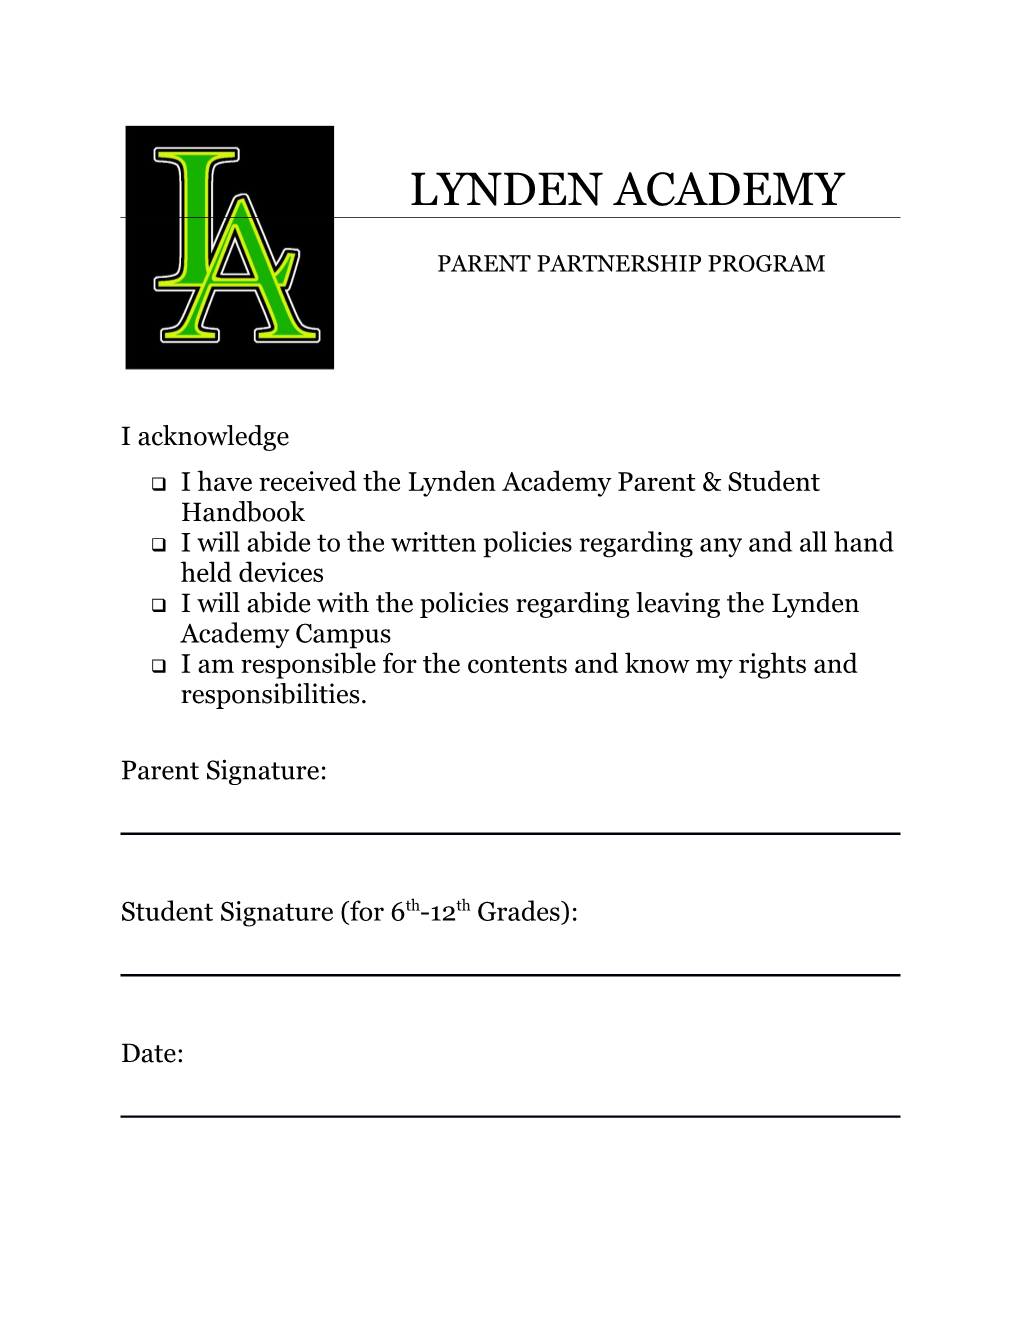 I Have Received the Lynden Academy Parent & Student Handbook